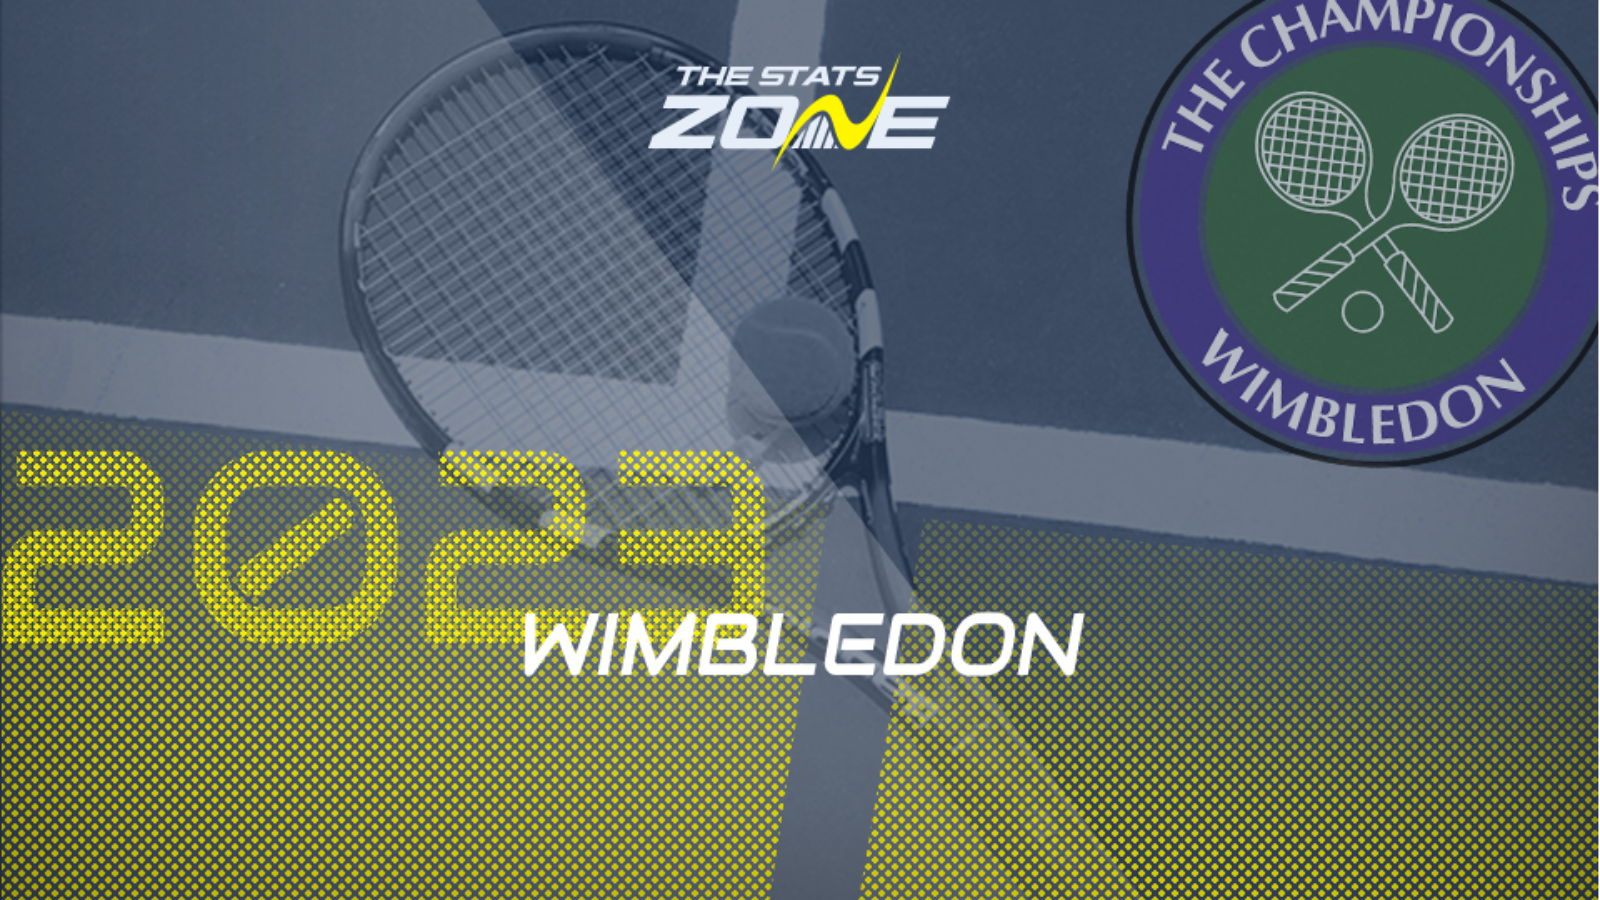 Tennis - The Stats Zone